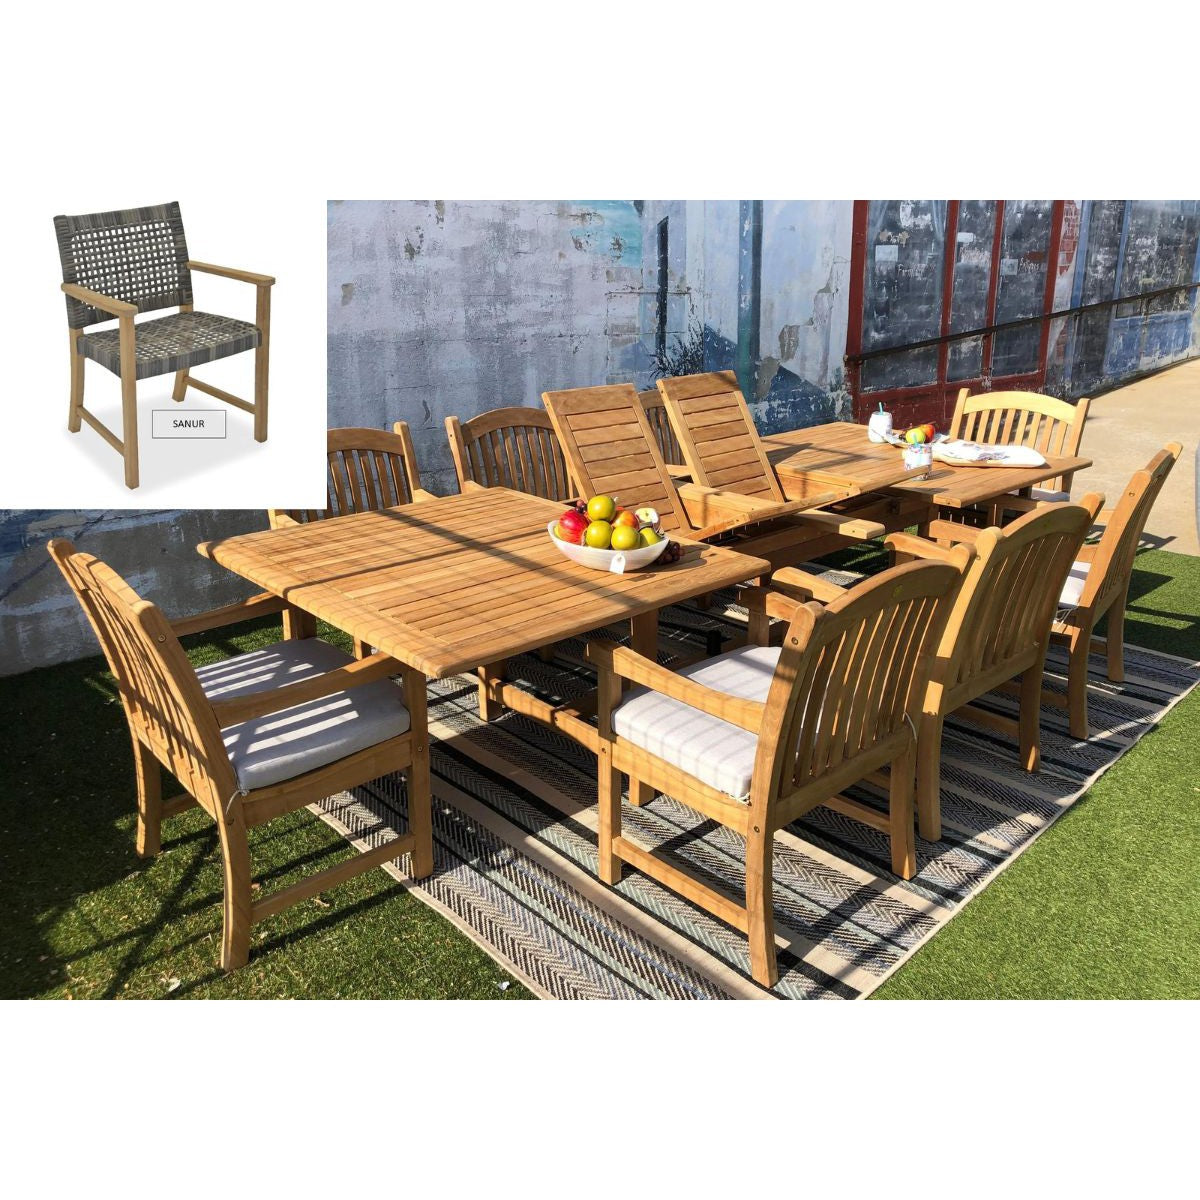 Teak Banquet 88-118" Extendable 9-Piece Outdoor Dining Set With SANUR Woven Chairs